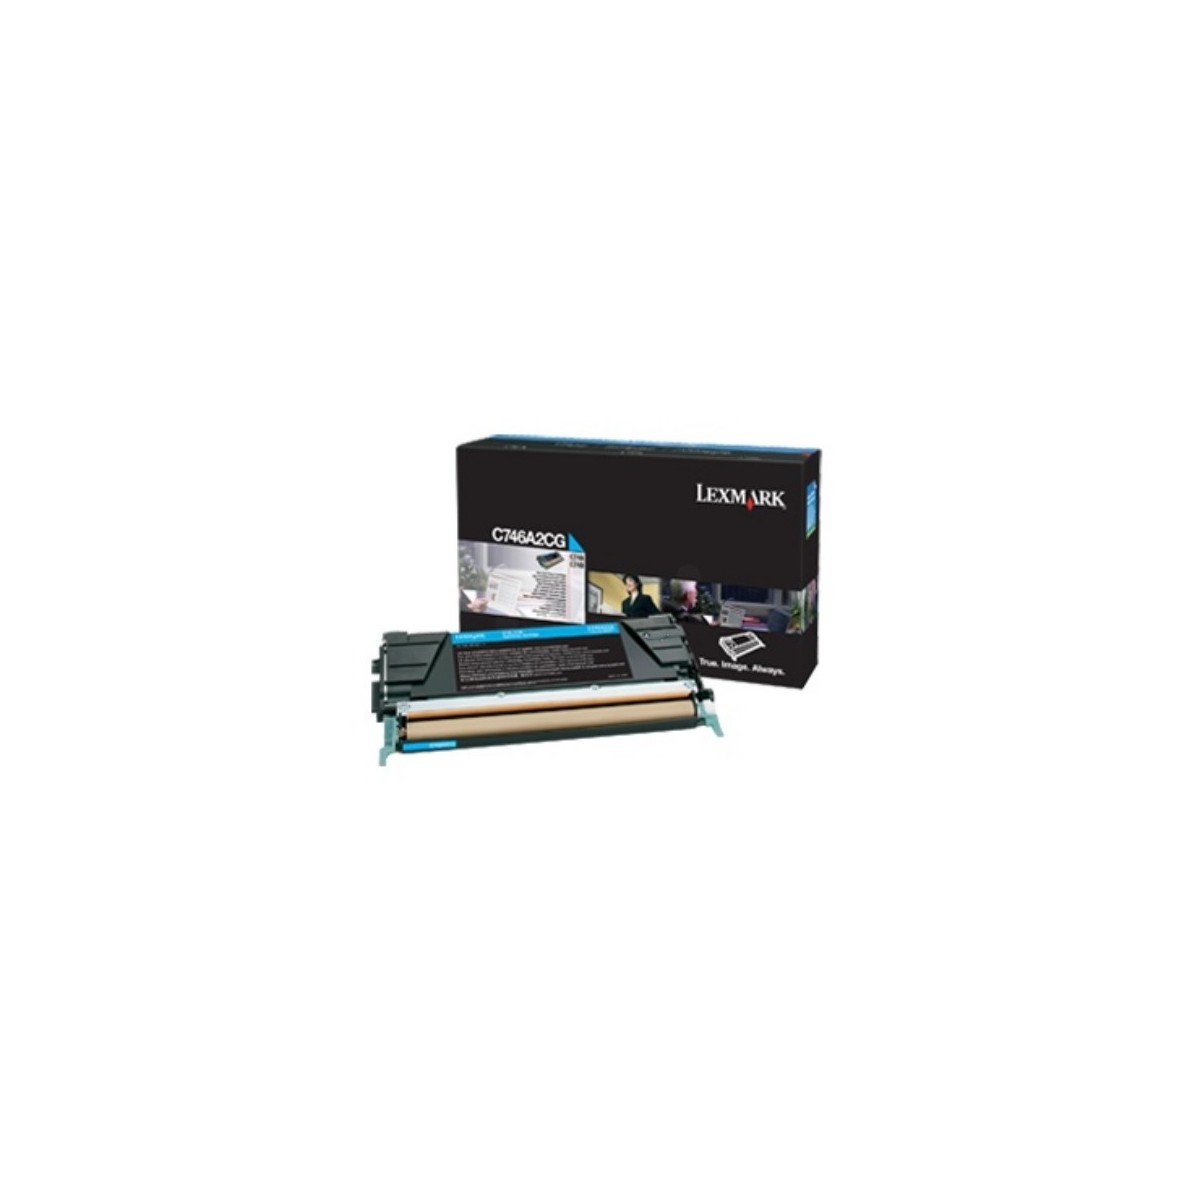 Lexmark C746A3CG - 7000 pages - Cyan - 1 pc(s)